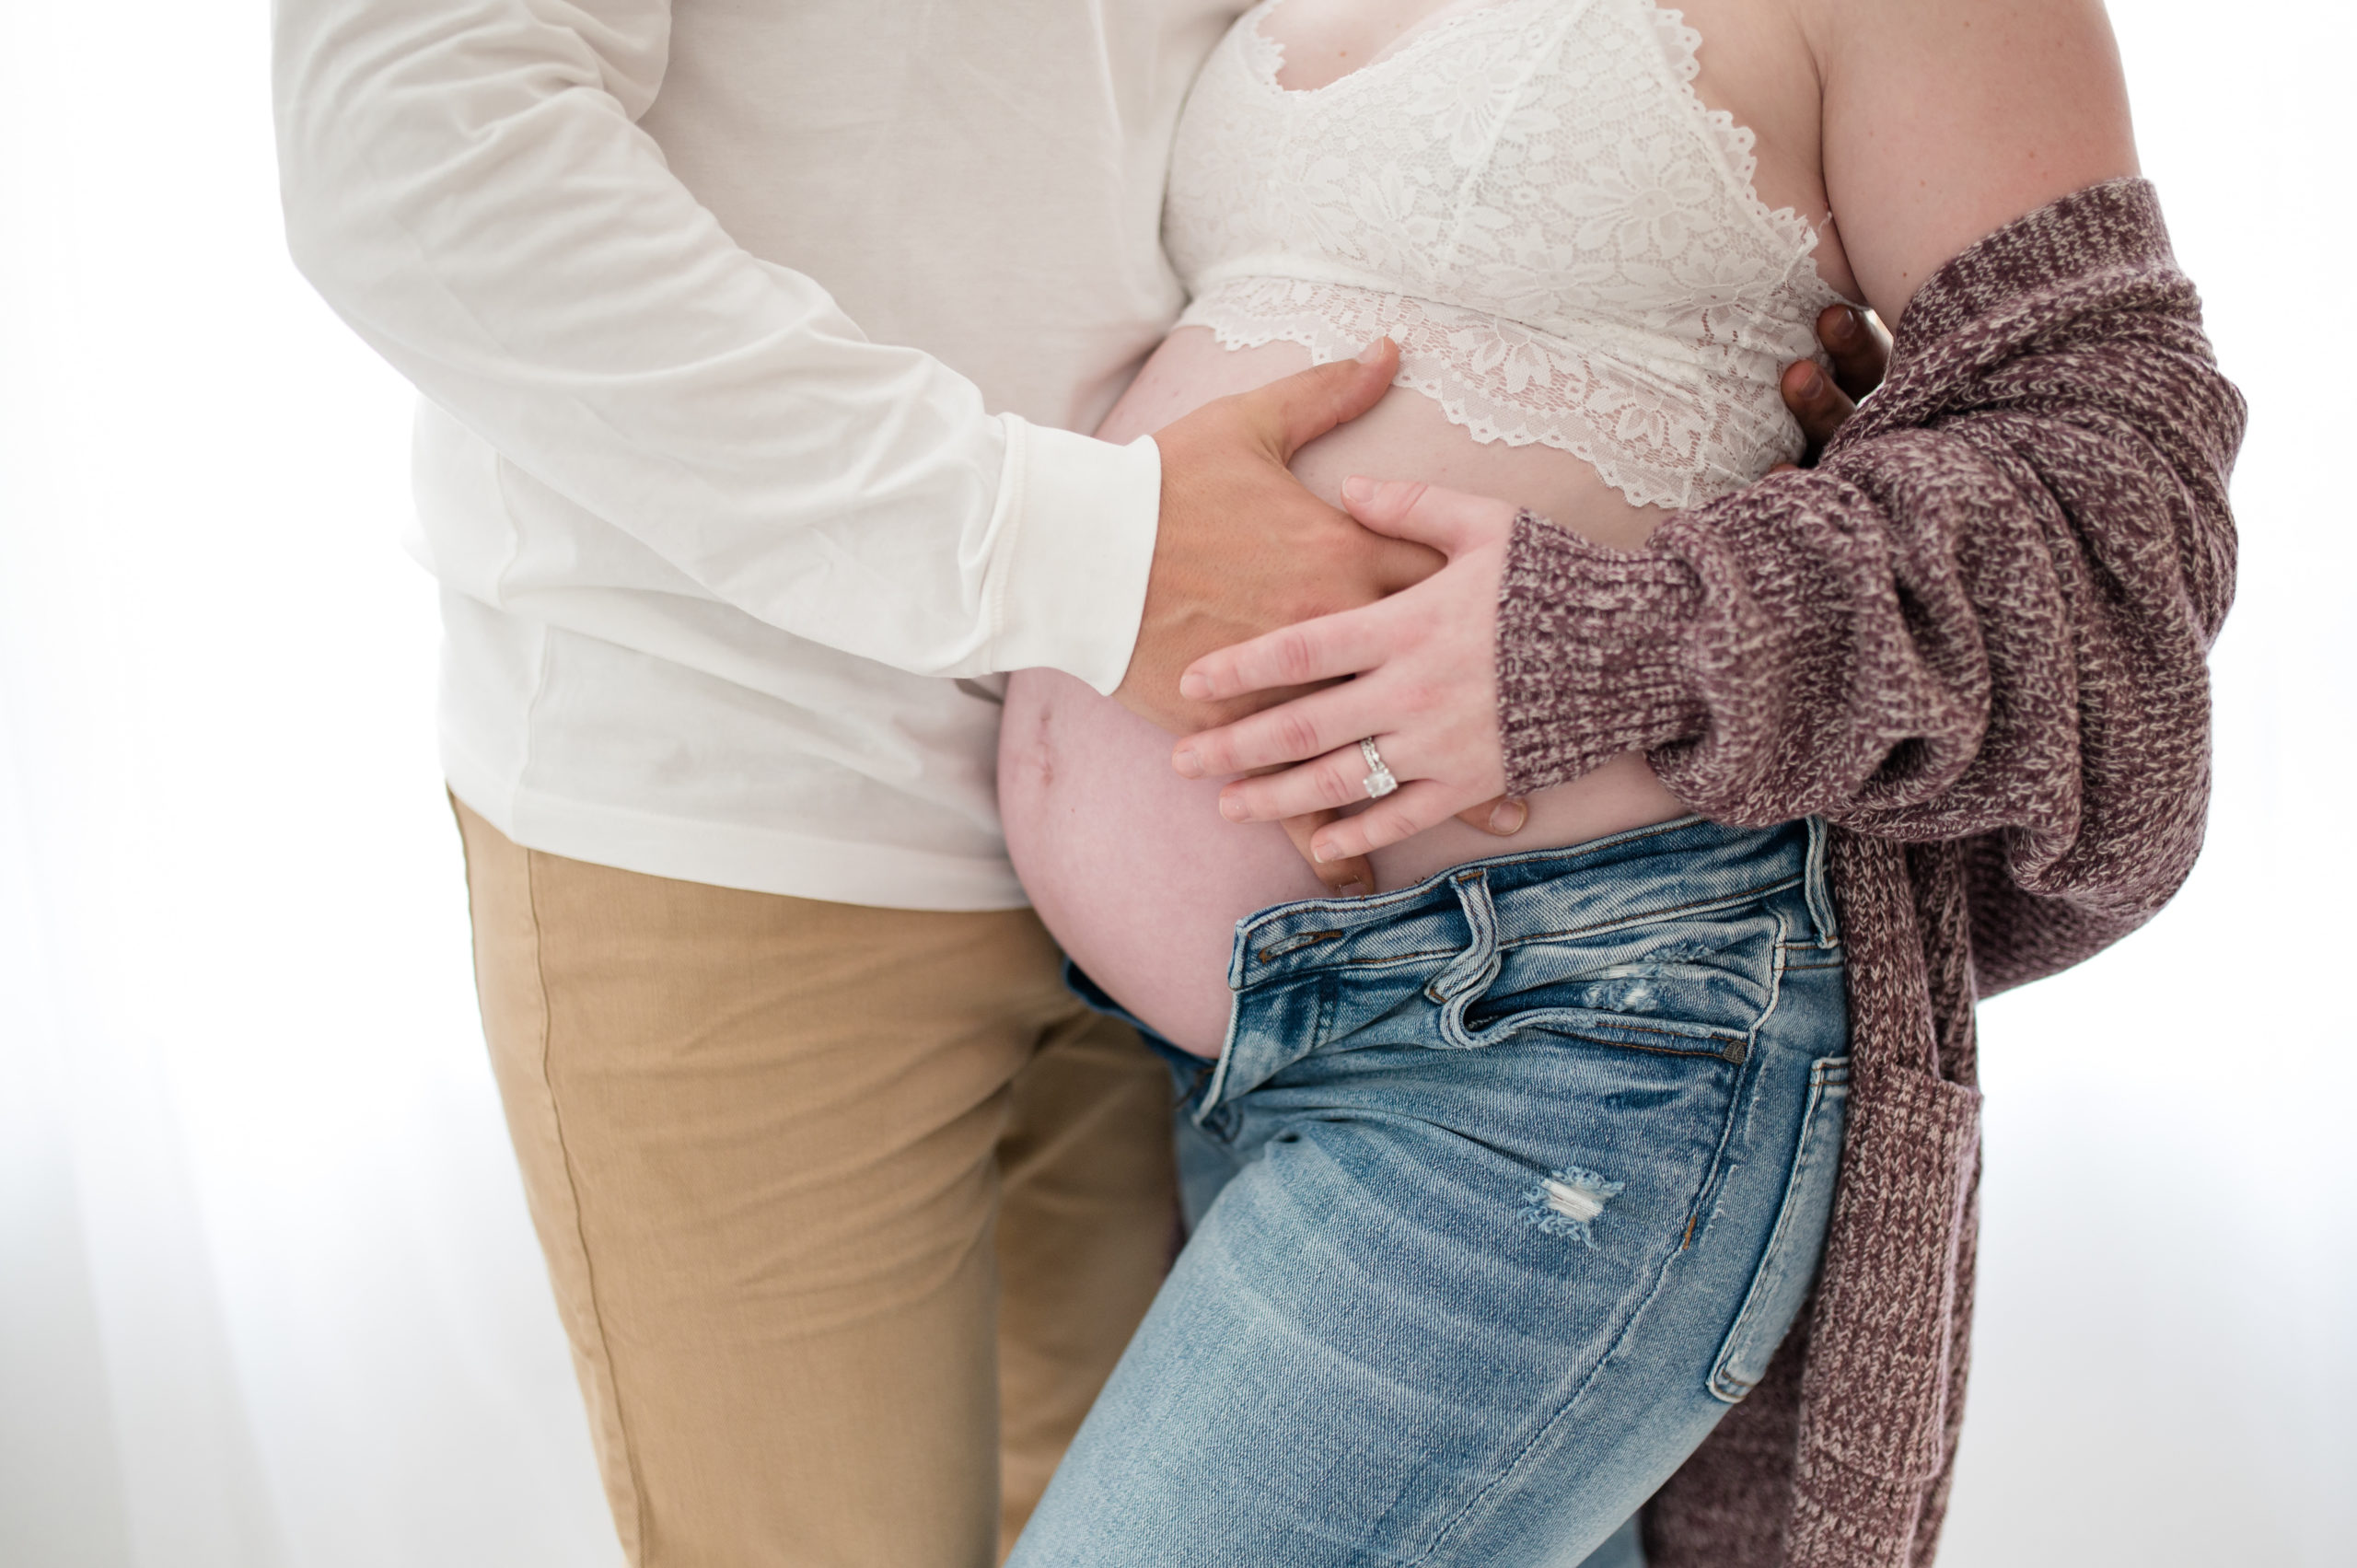 baby bump of pregnant woman photographed by Dallas newborn photographer, Lindsey Dutton Photography